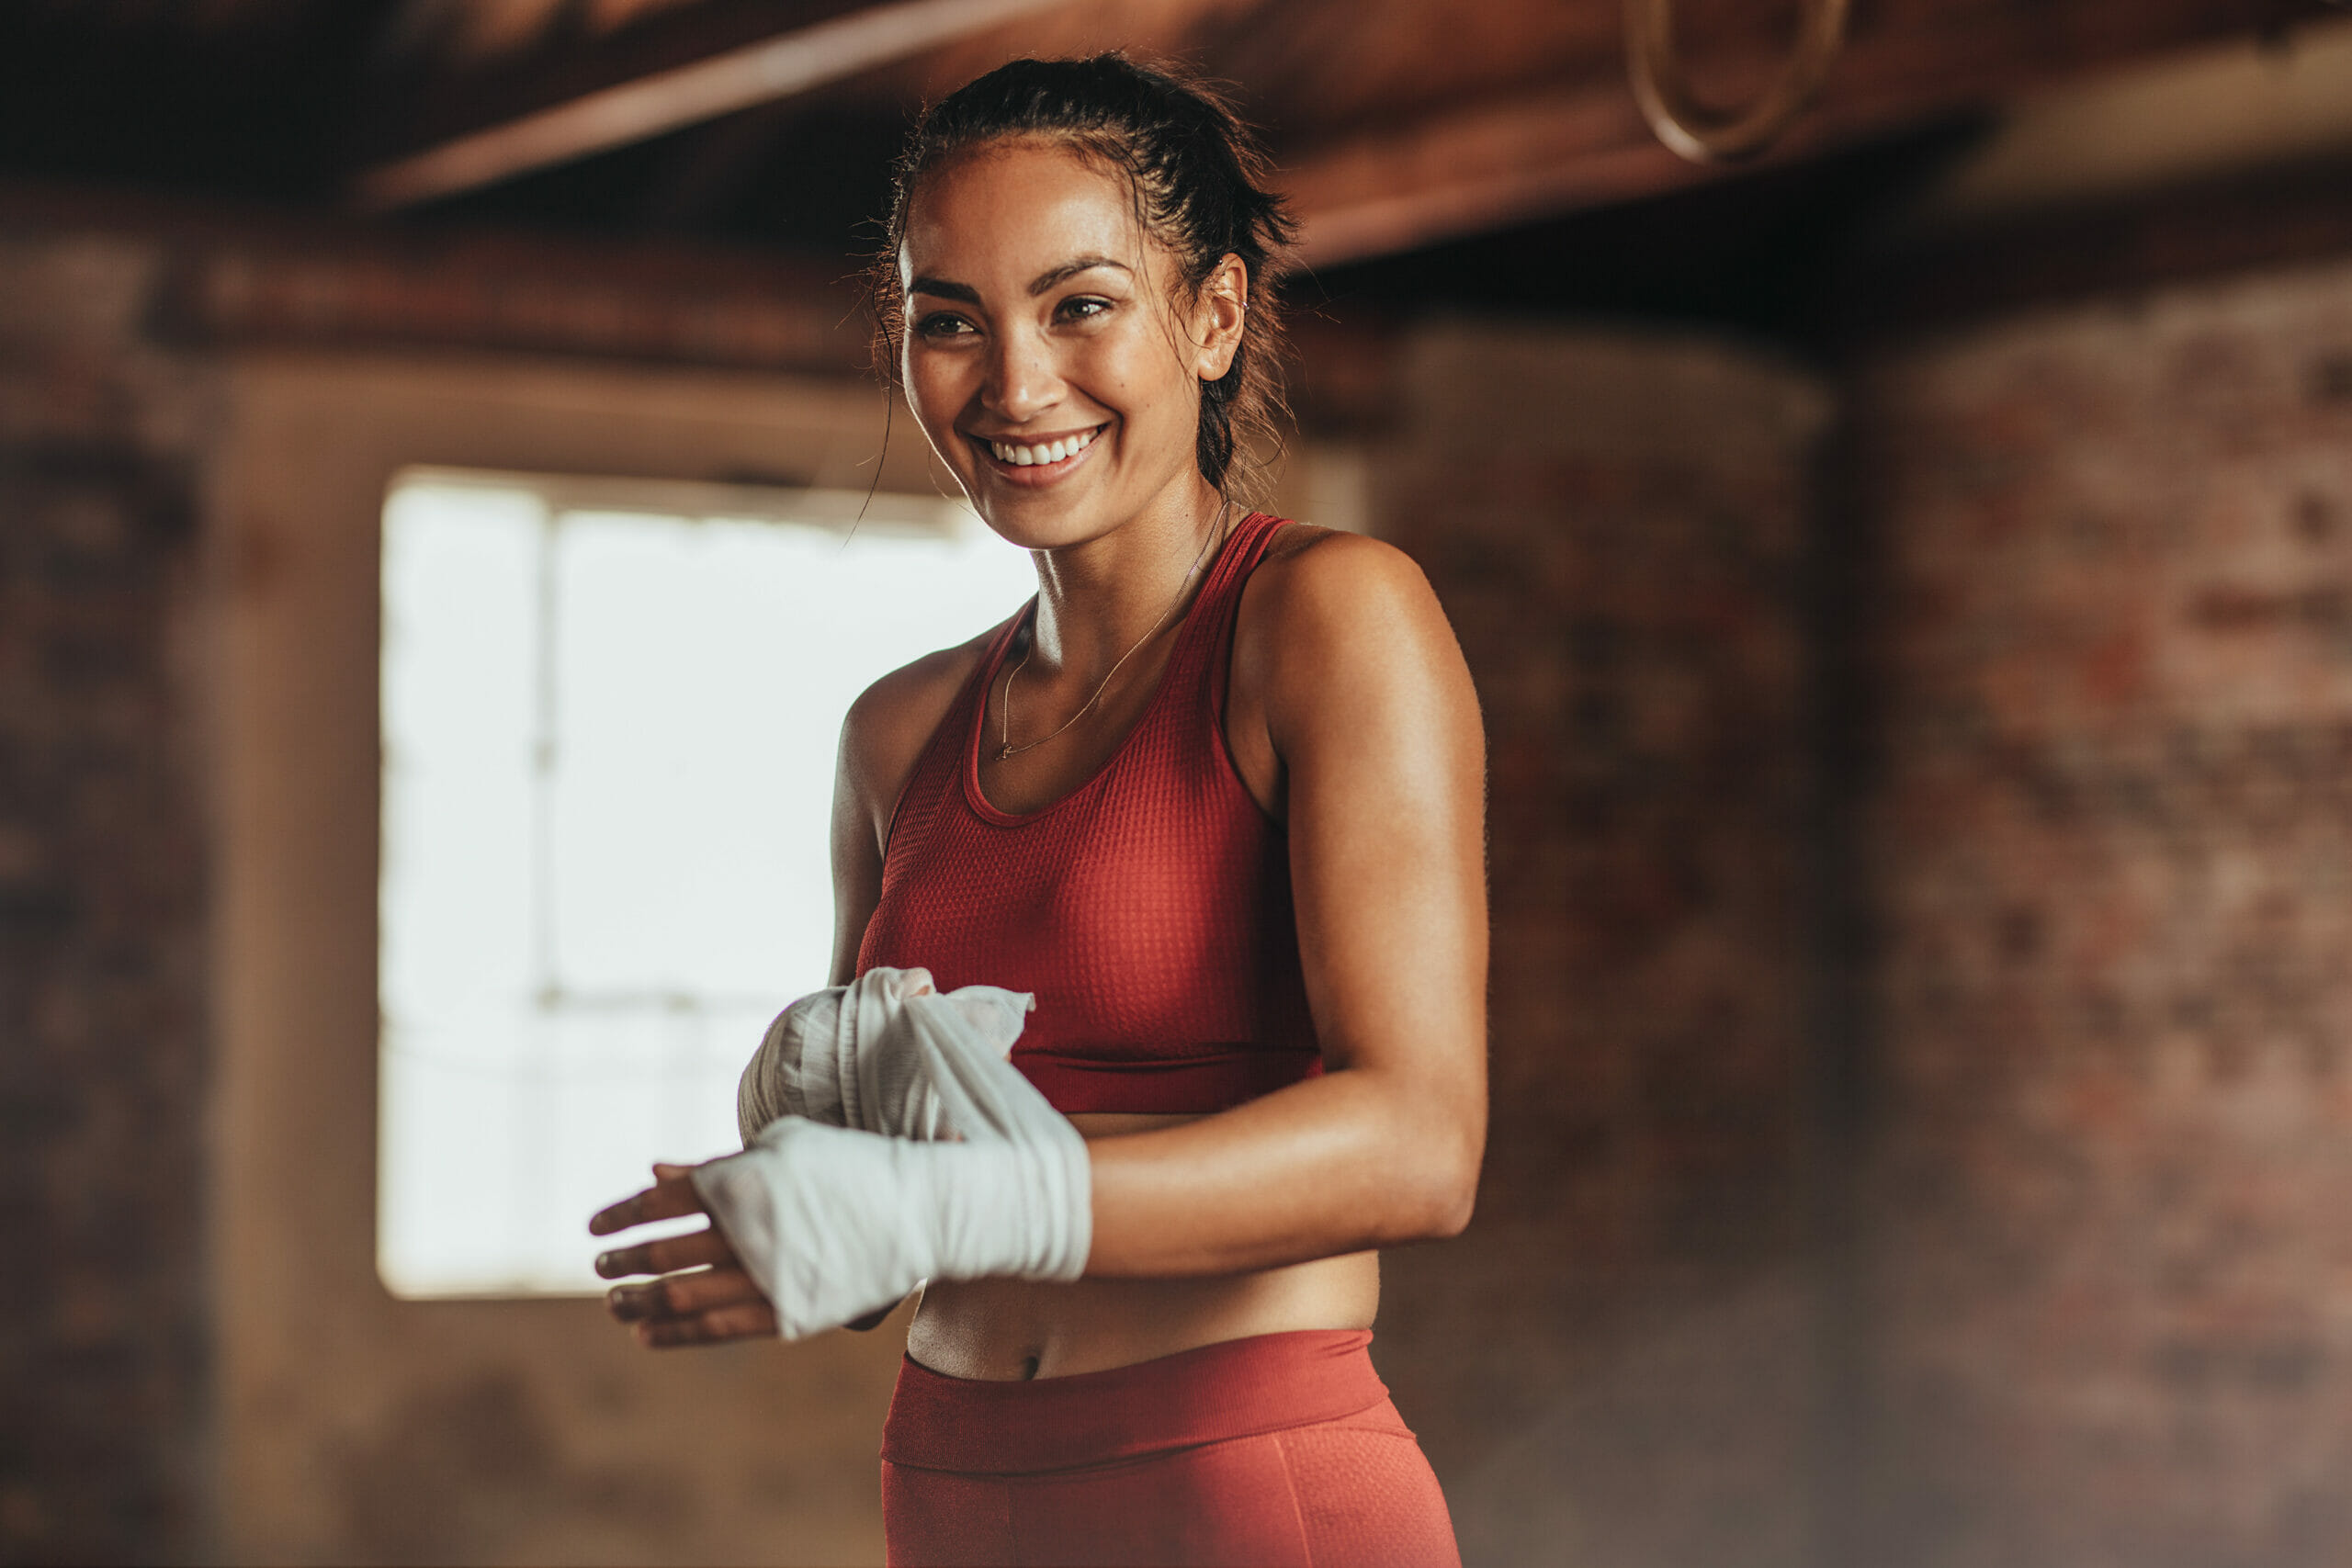 Woman getting ready for boxing practice